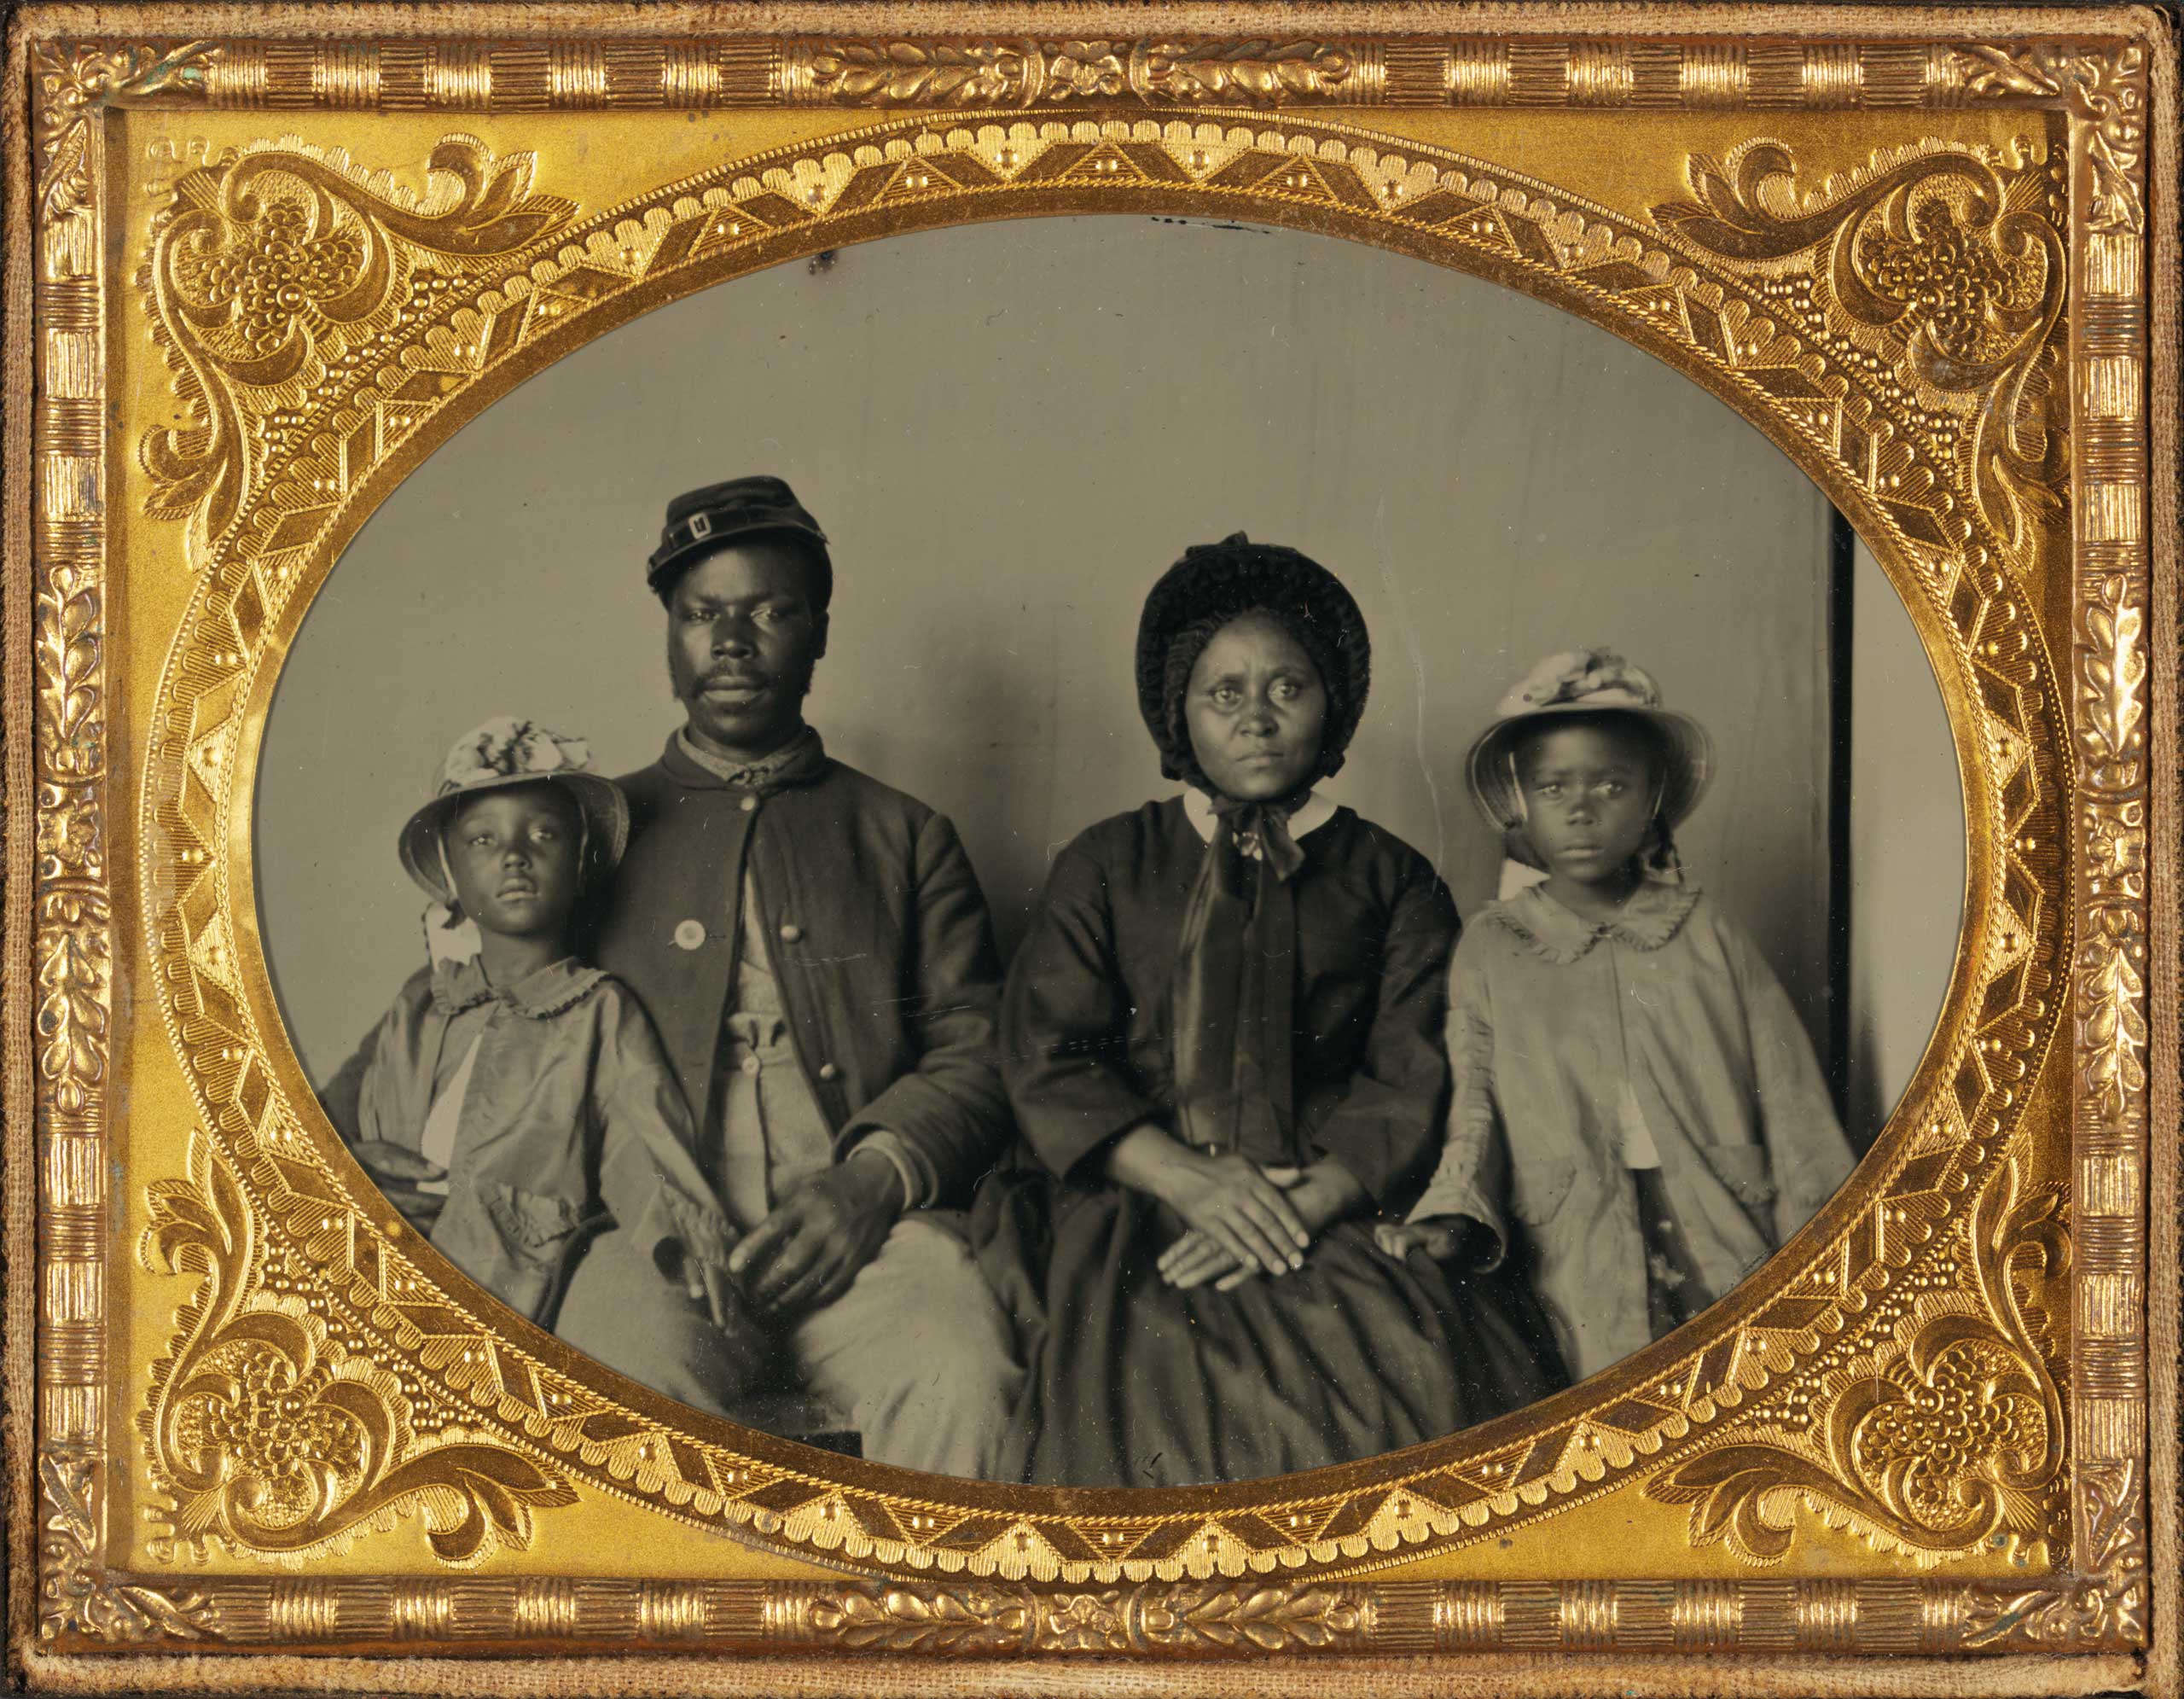 Unidentified African American soldier in Union uniform with wife and two daughters, 1863-1865.